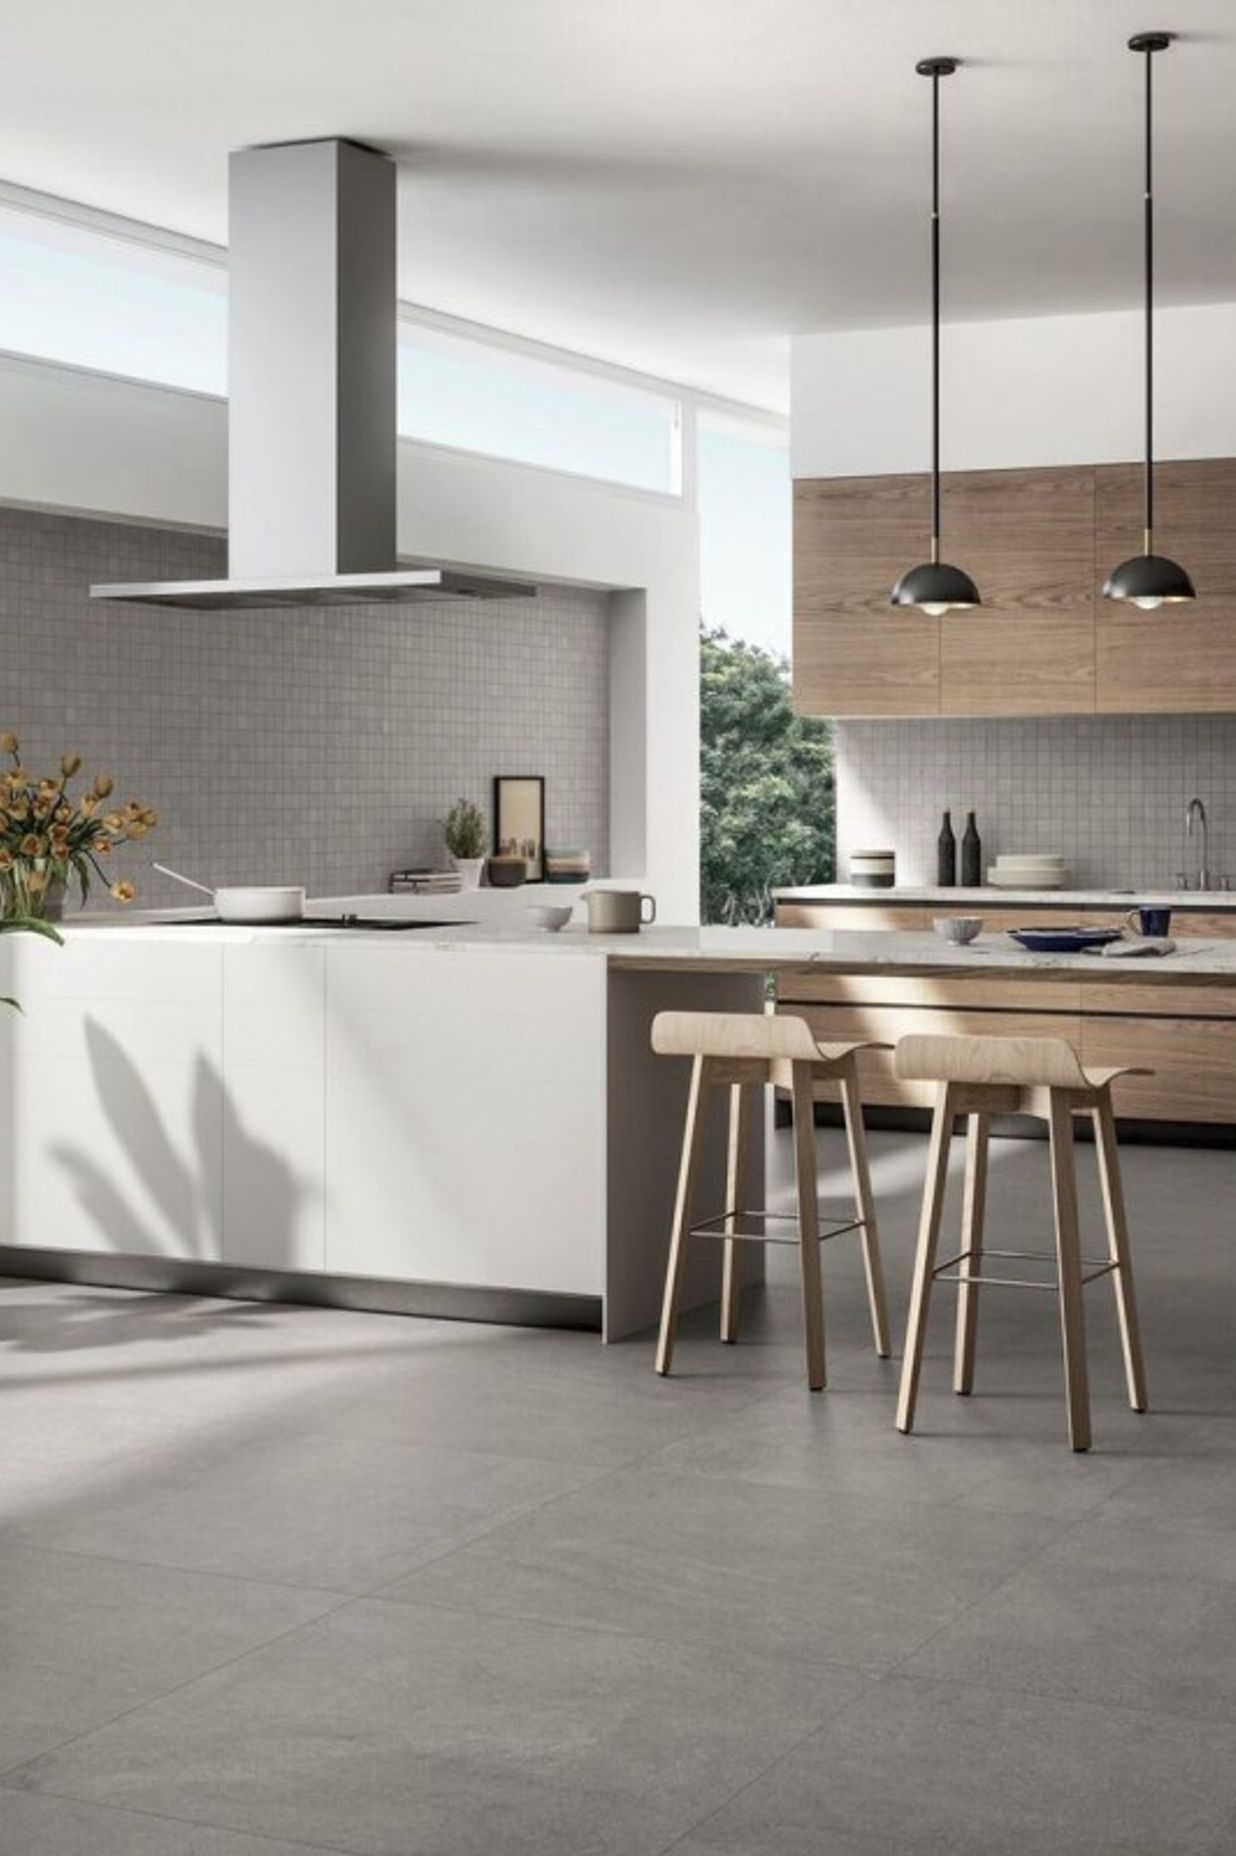 As seen in the picture, this kitchen flooring features large slabs of square tiles where the grouting is matched with the colour of the tile. This give the floor a a sort of continuity as the grout lines are hardly visible. (Tile Depot 2021)